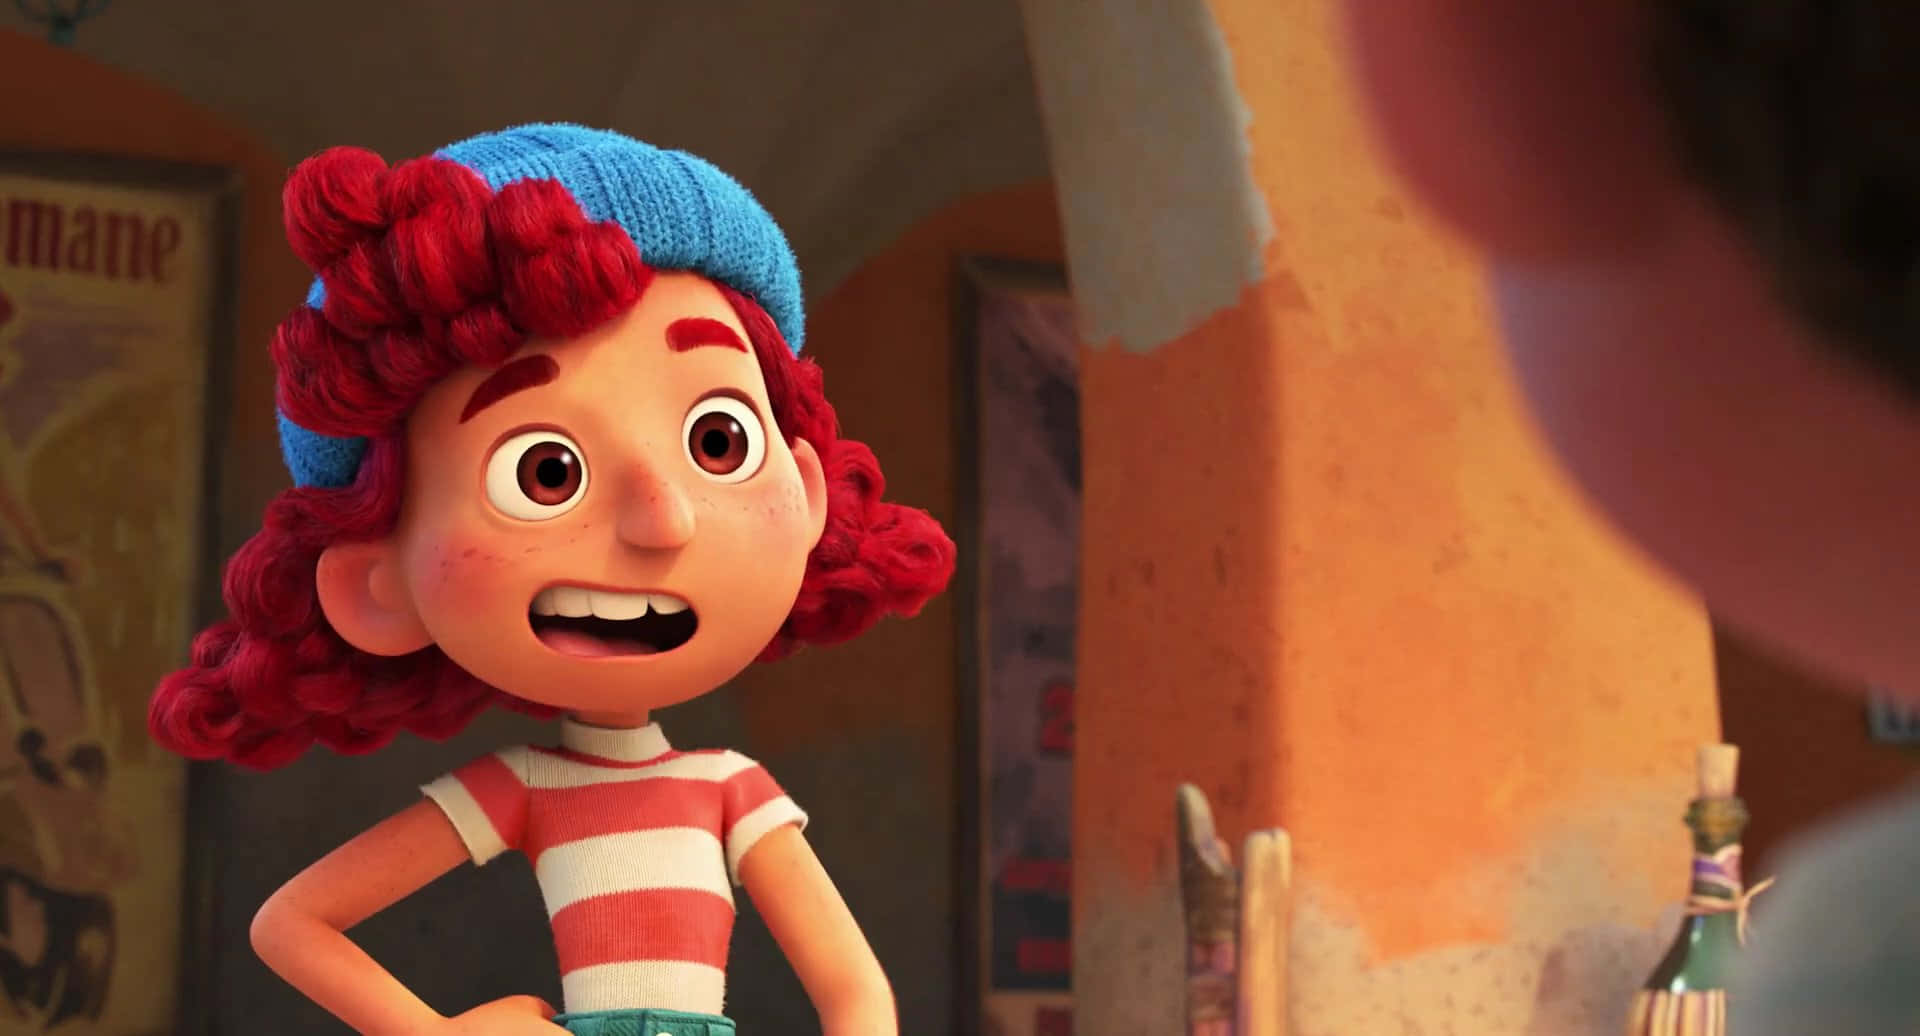 A Cartoon Character With Red Hair Is Standing Next To Another Person